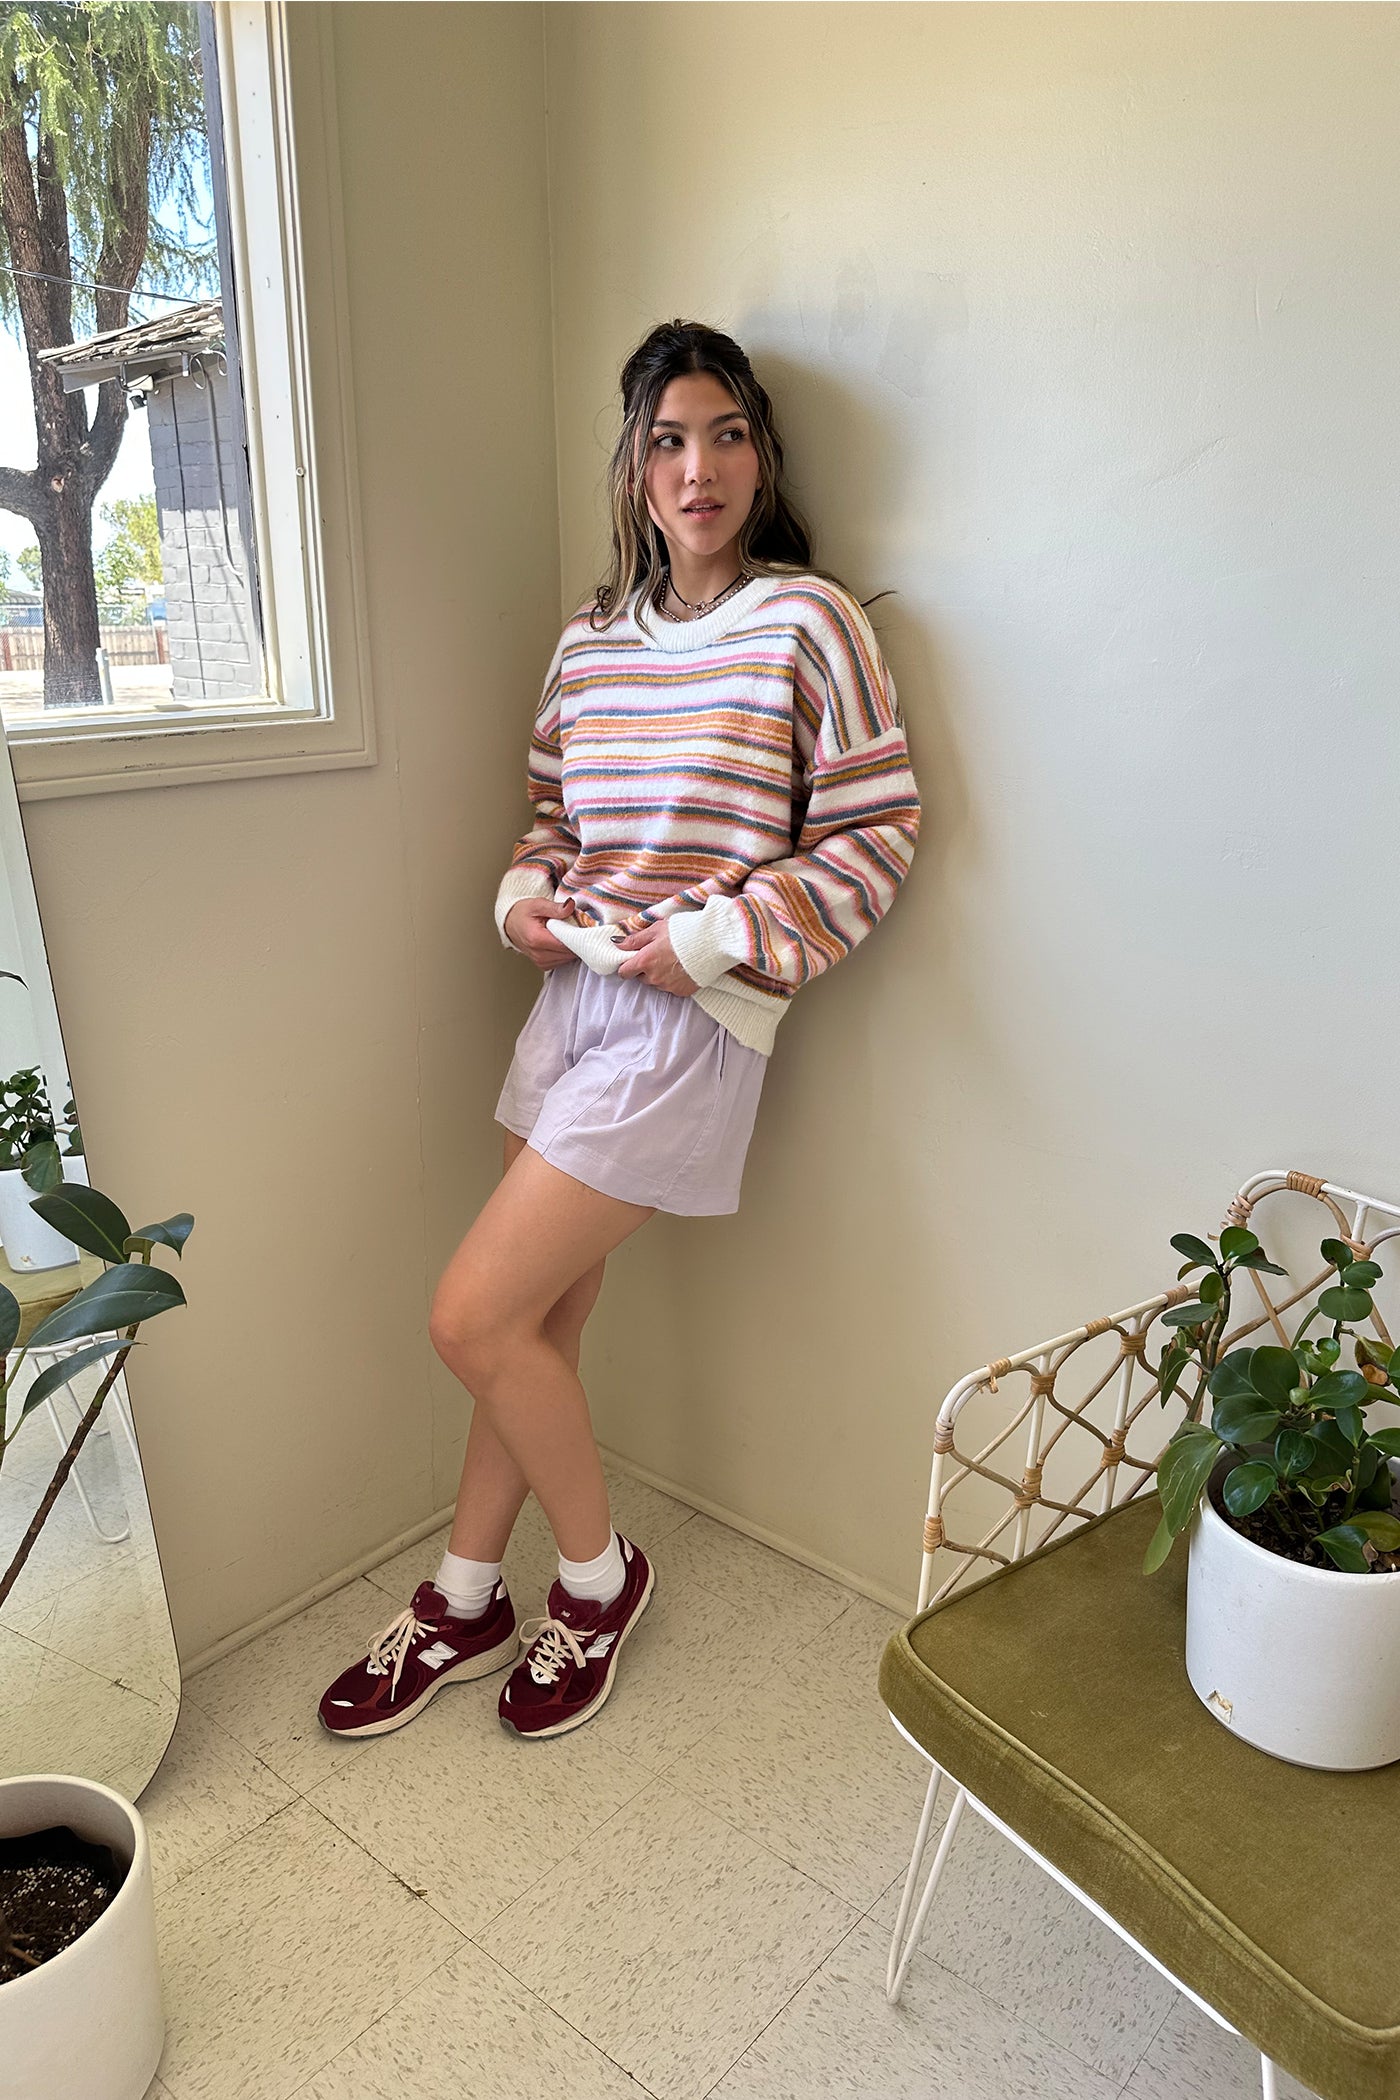 Striped Knit Sweater by For Good